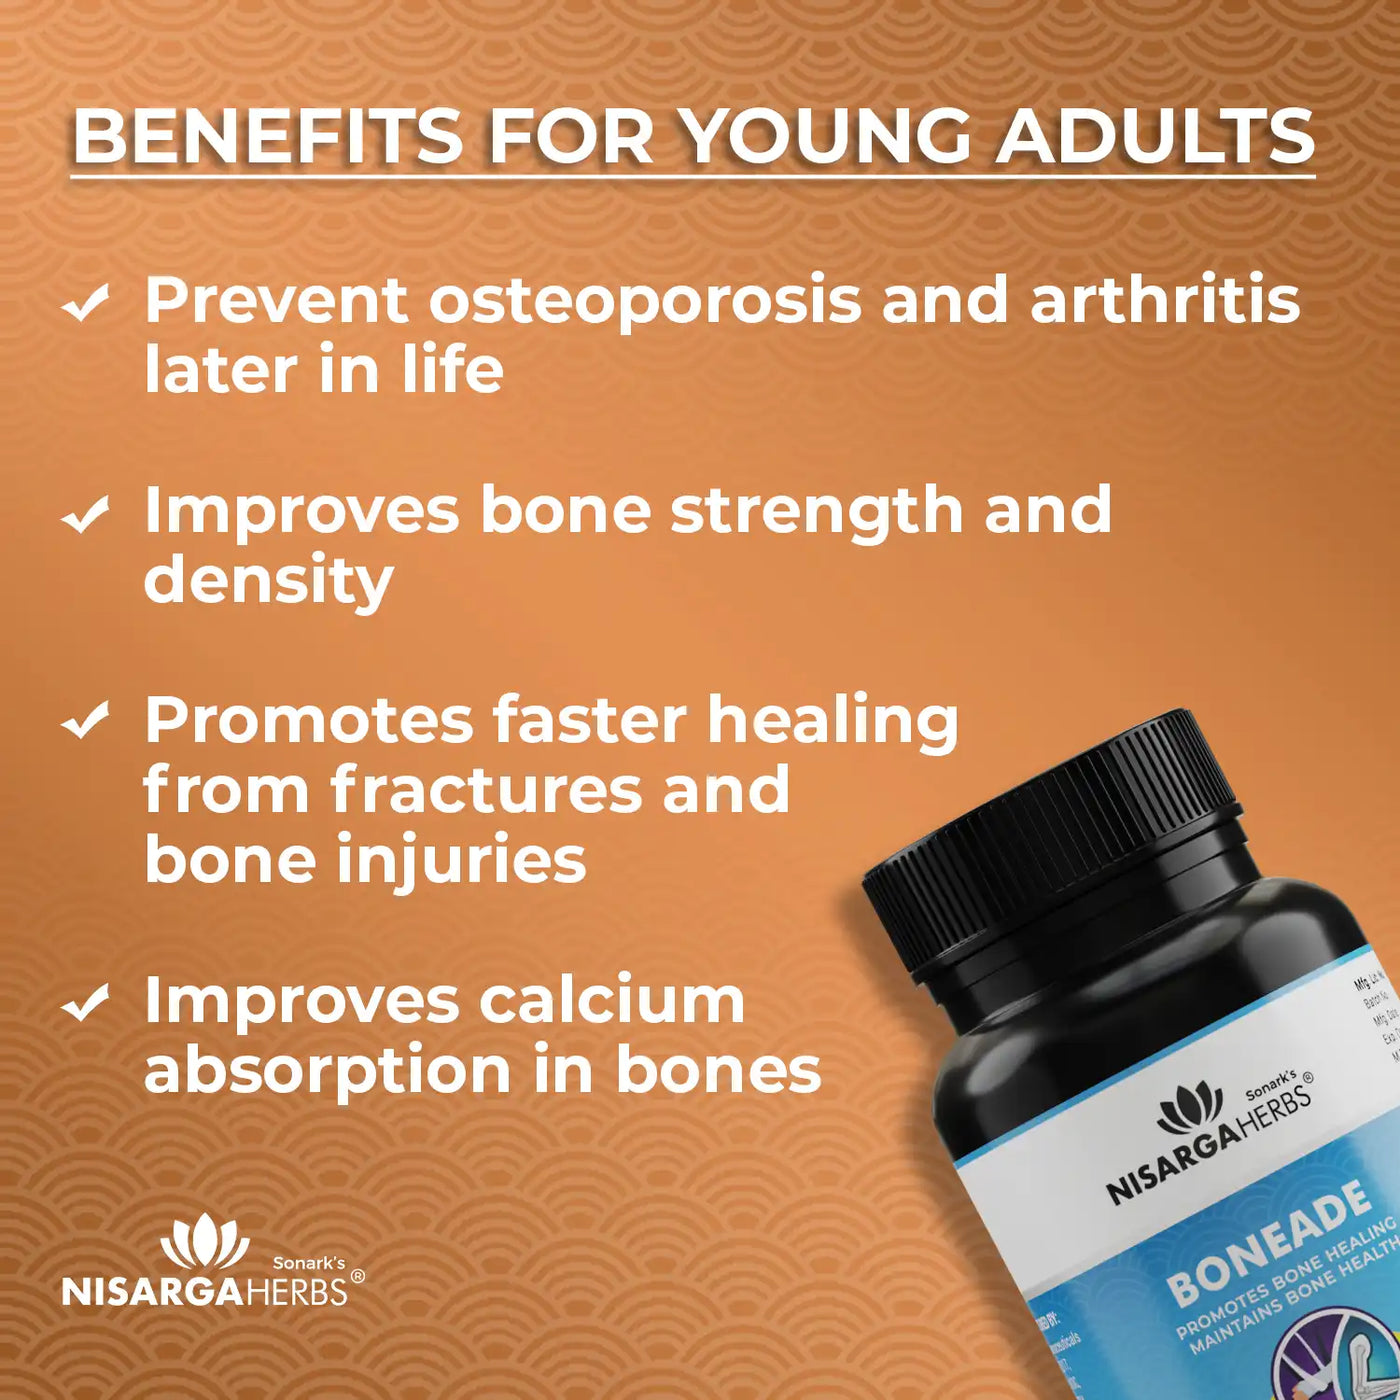 prevents osteoporosis and arthritis in old age, improves bone density and strength, promotes faster healing of fractures, improves calcium absorption in bones. 